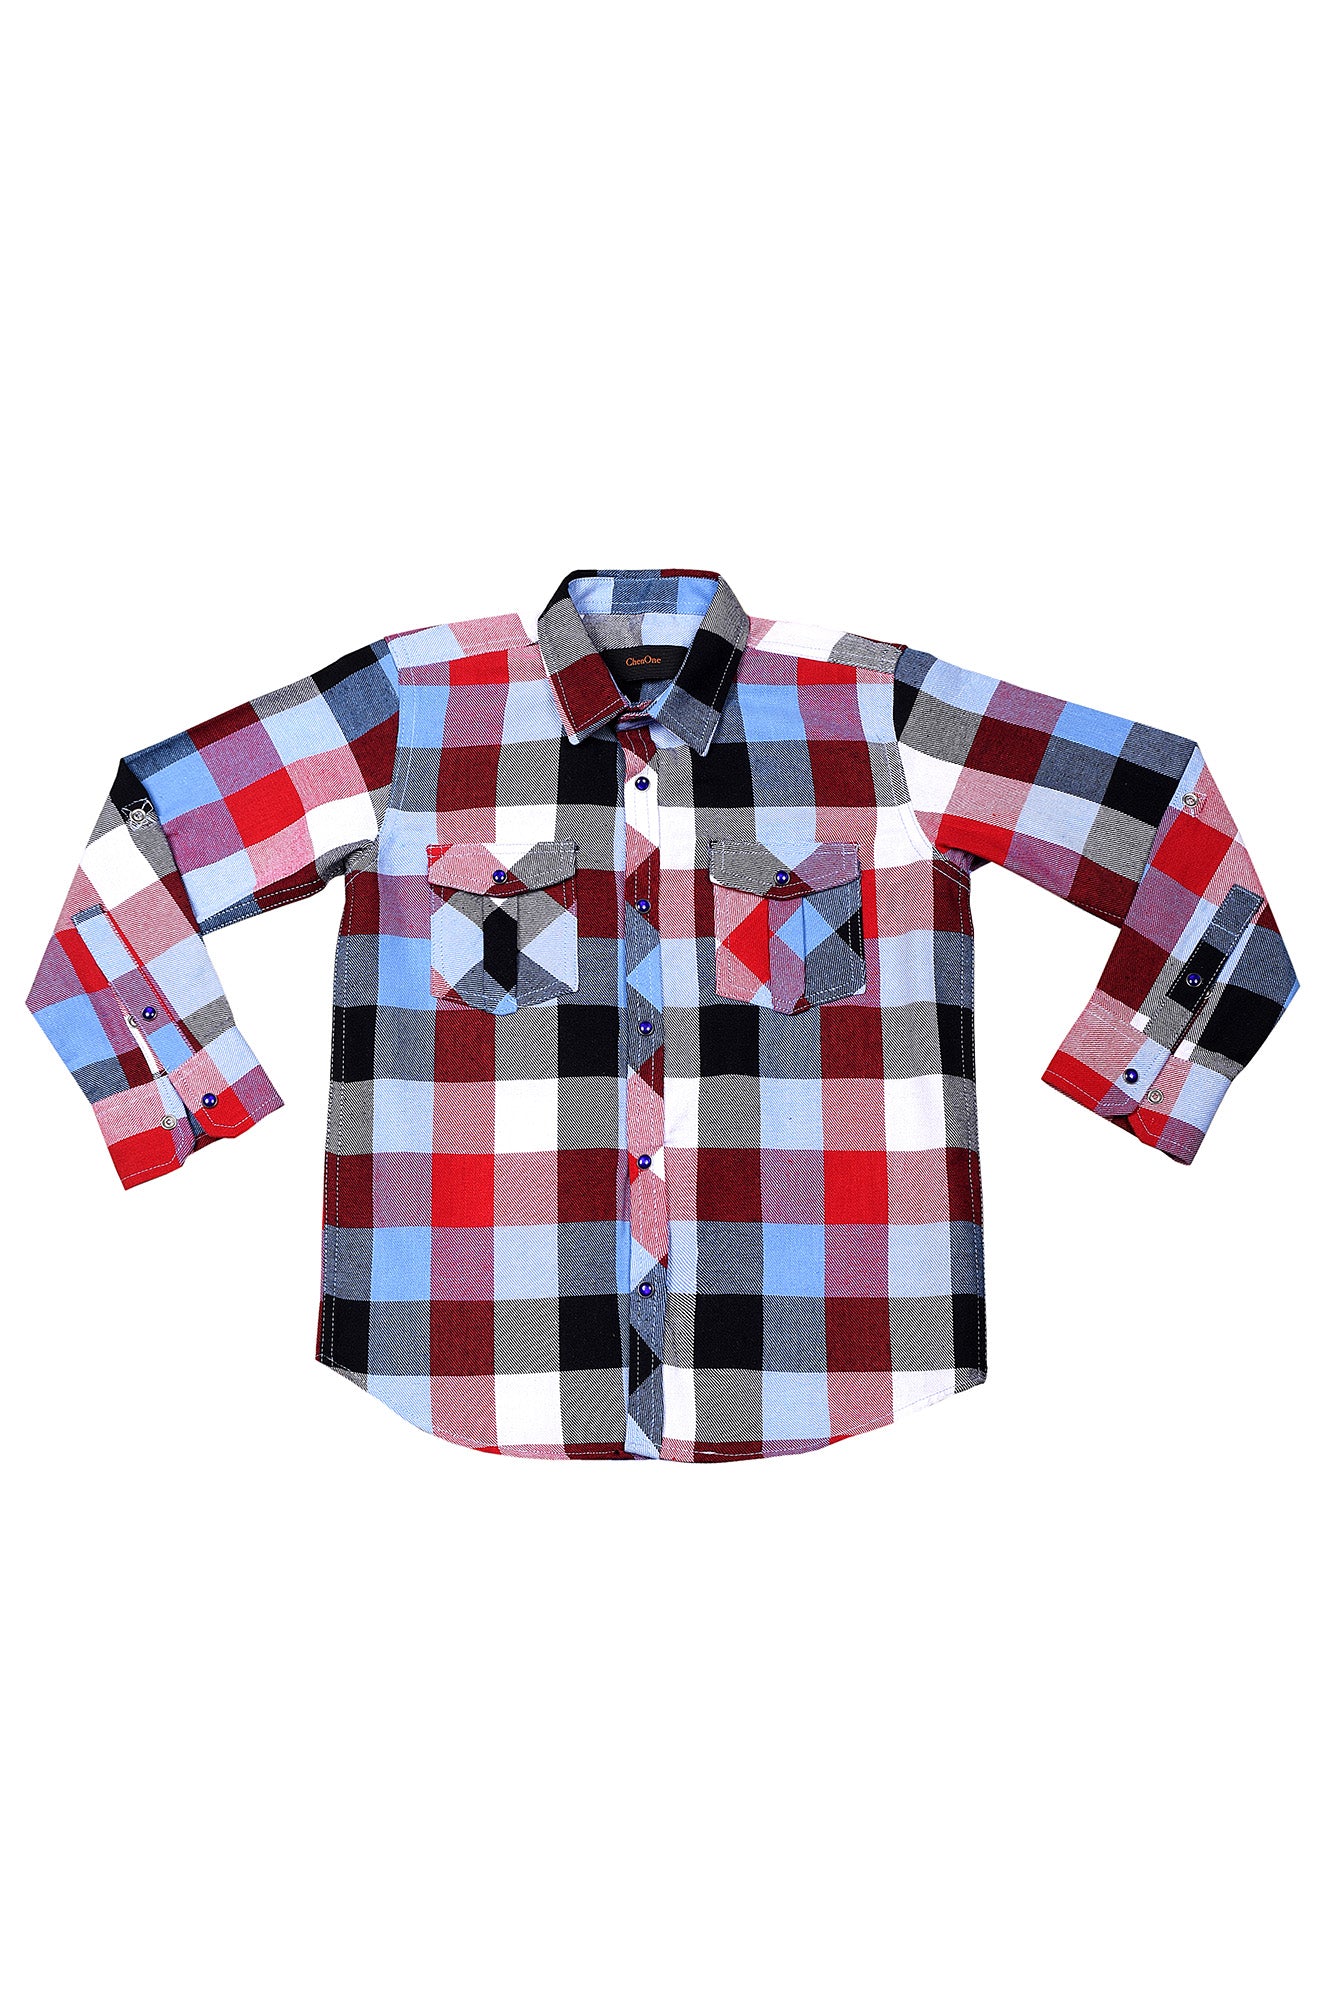 KDS-B-13139 SHIRT CASUAL RED CHECK